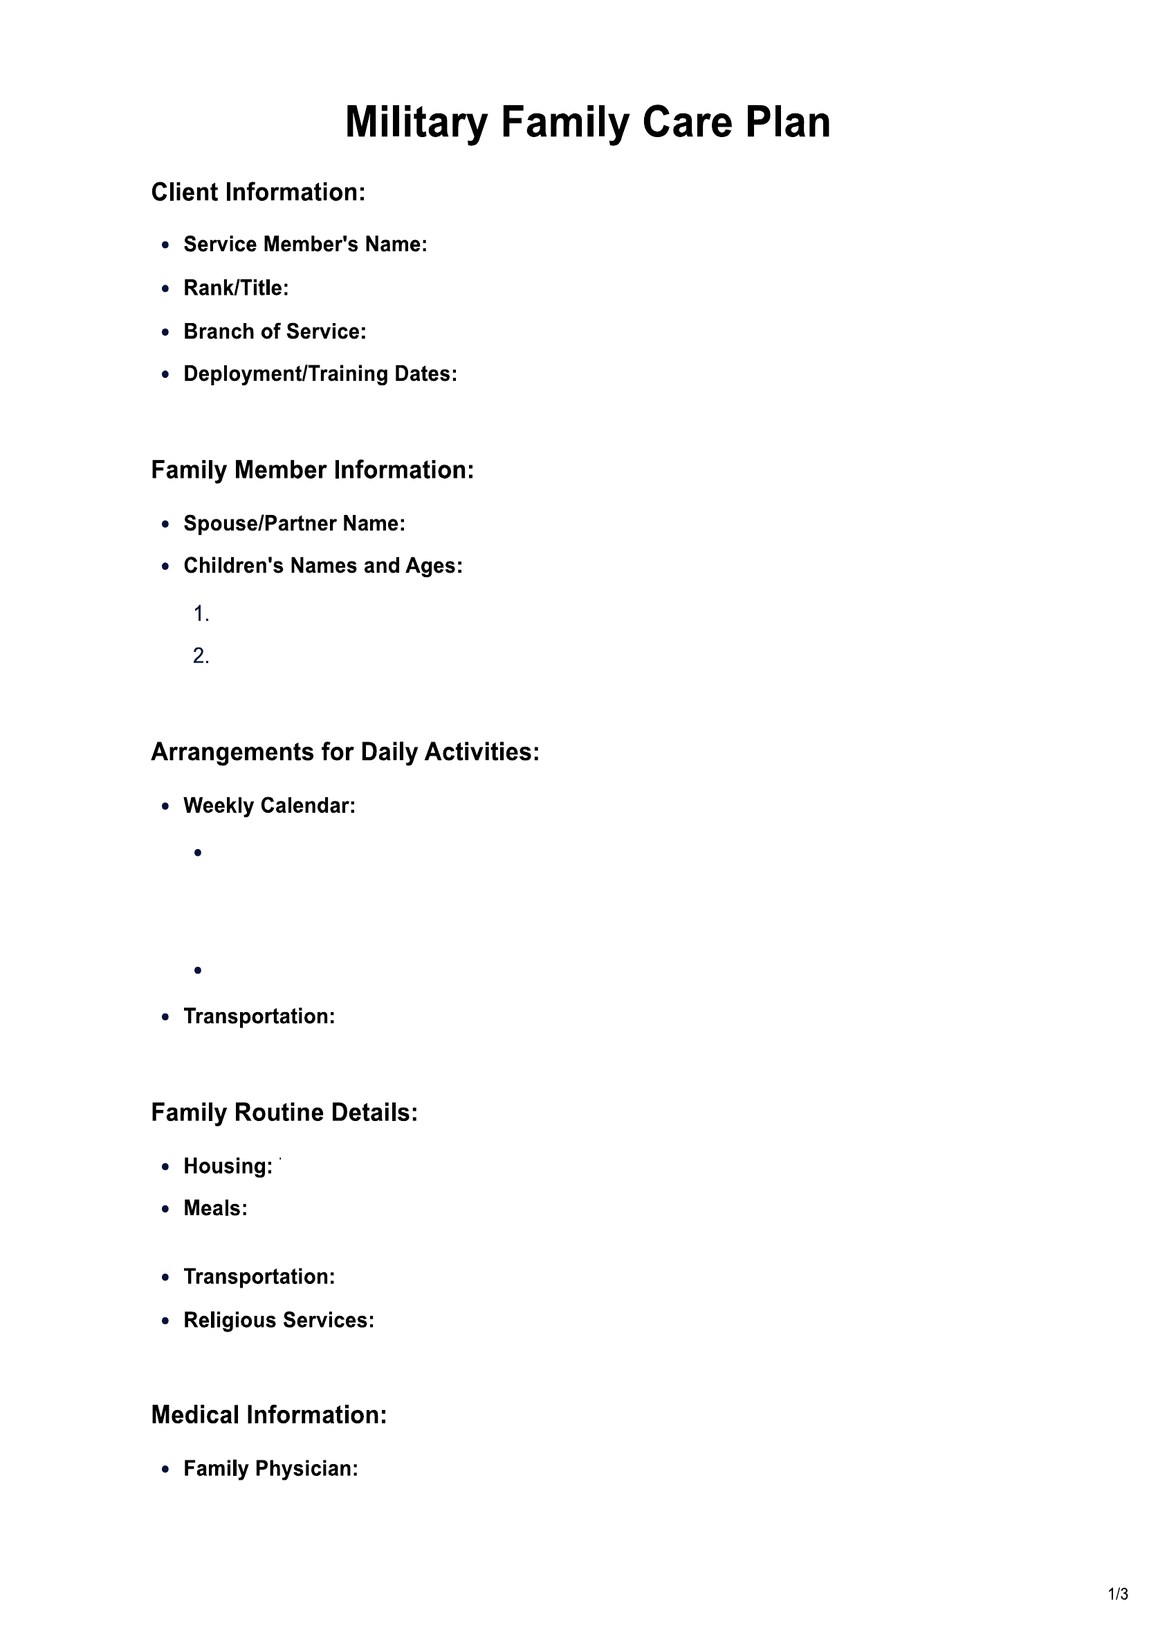 Military Family Care Plan PDF Example